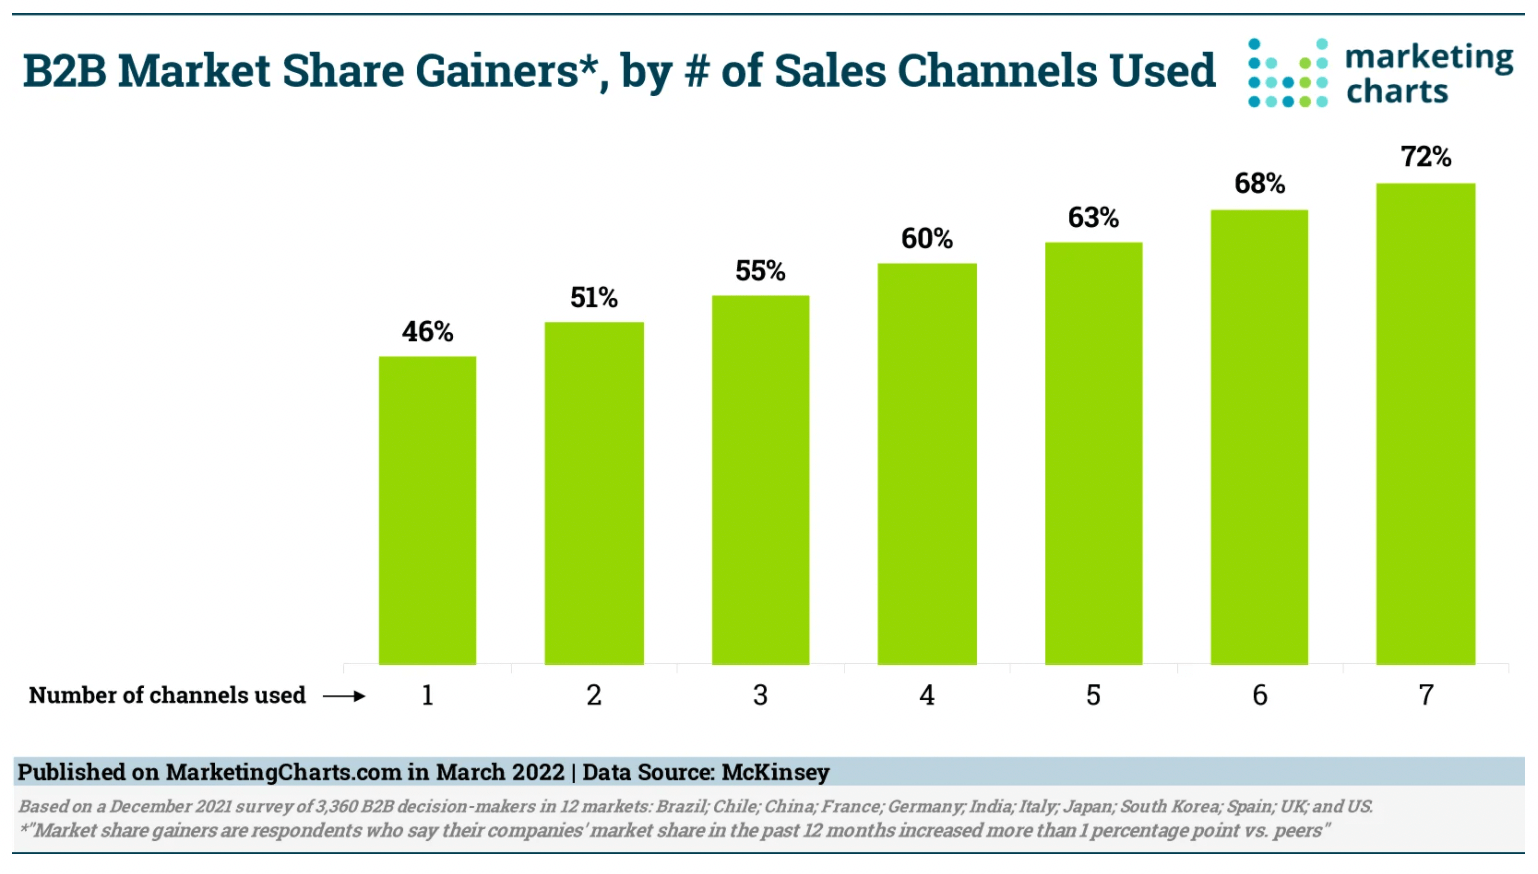 Infographic showing the B2B market share gain based on the number of demand gen channels